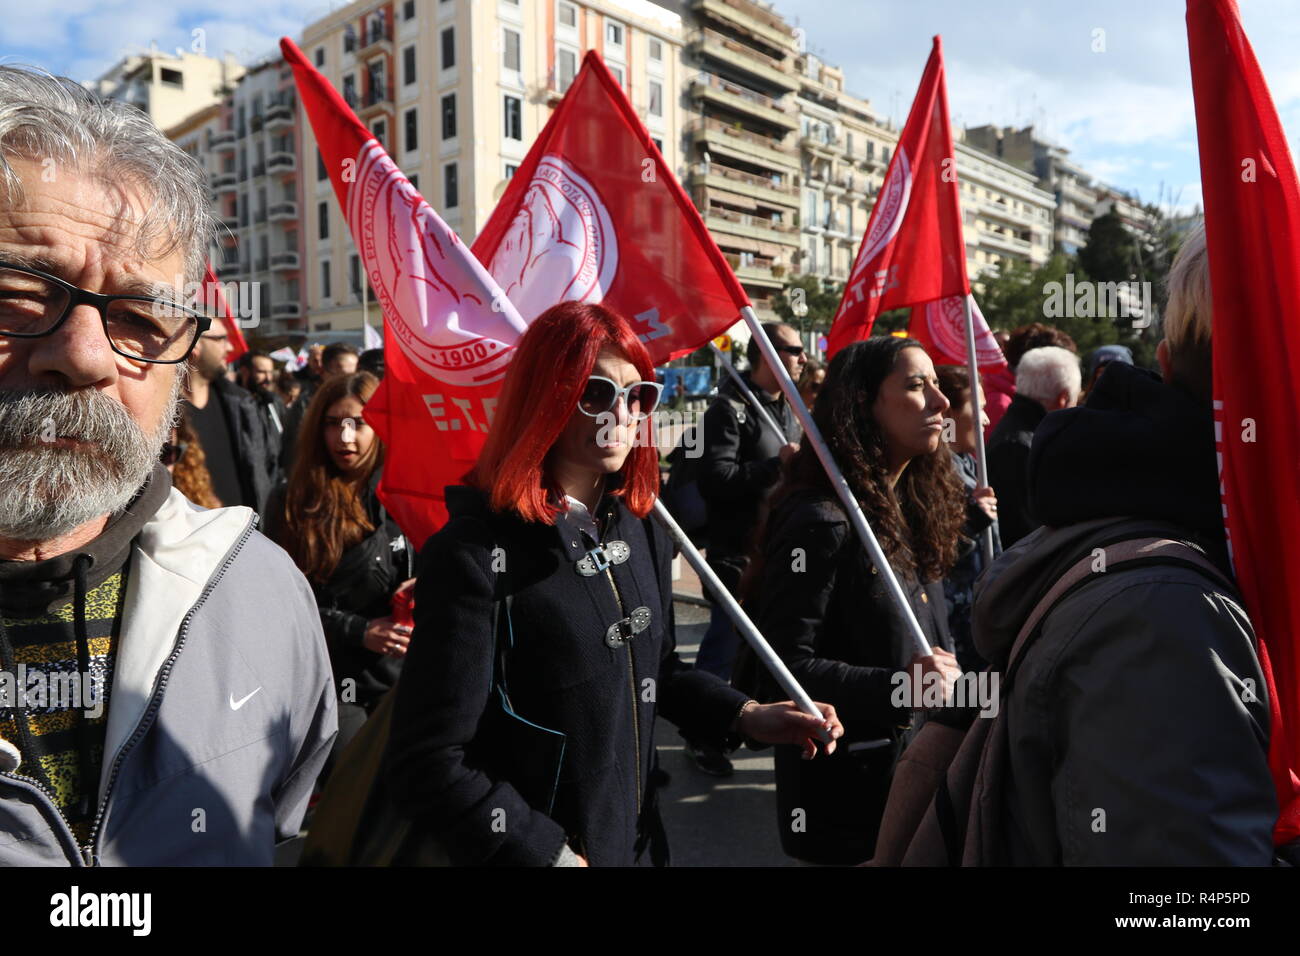 Thessaloniki, Greece, 28th November, 2018. Protesters from the communist-affiliated trade union PAME take part in a demonstration during a 24-hour walkout staged by Greece's largest private sector union GSEE  against planned pension cuts and to demand the reversal of labour reforms implemented under the country's third bailout. The strike by the GSEE union is the second major strike since Greece exited its bailout programm in August. Credit : Orhan Tsolak / Alamy Live News. Stock Photo